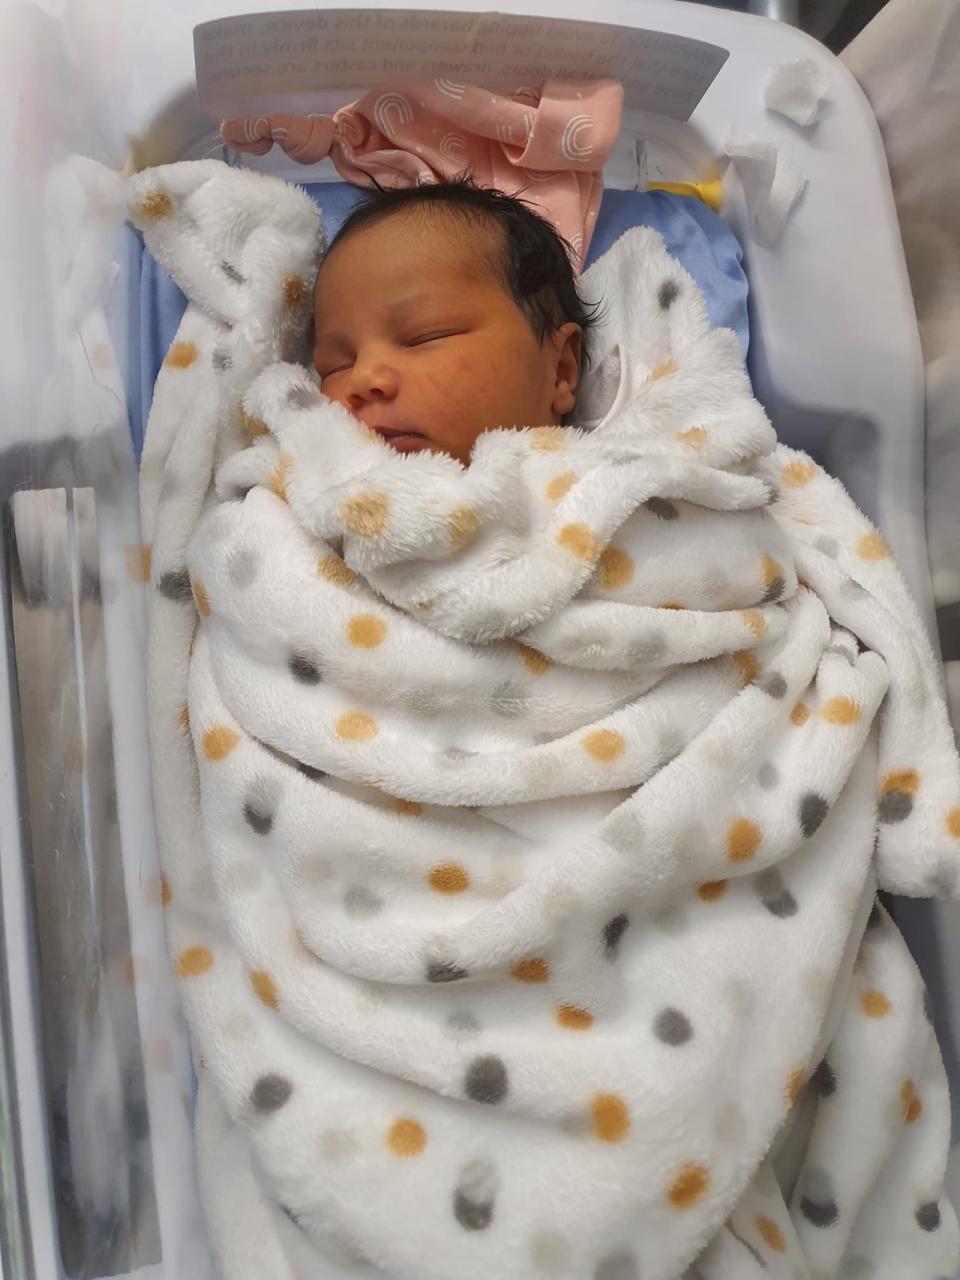 Baby Yohana Alemneh Amare was born one month after her family arrived in Calgary, Alberta.